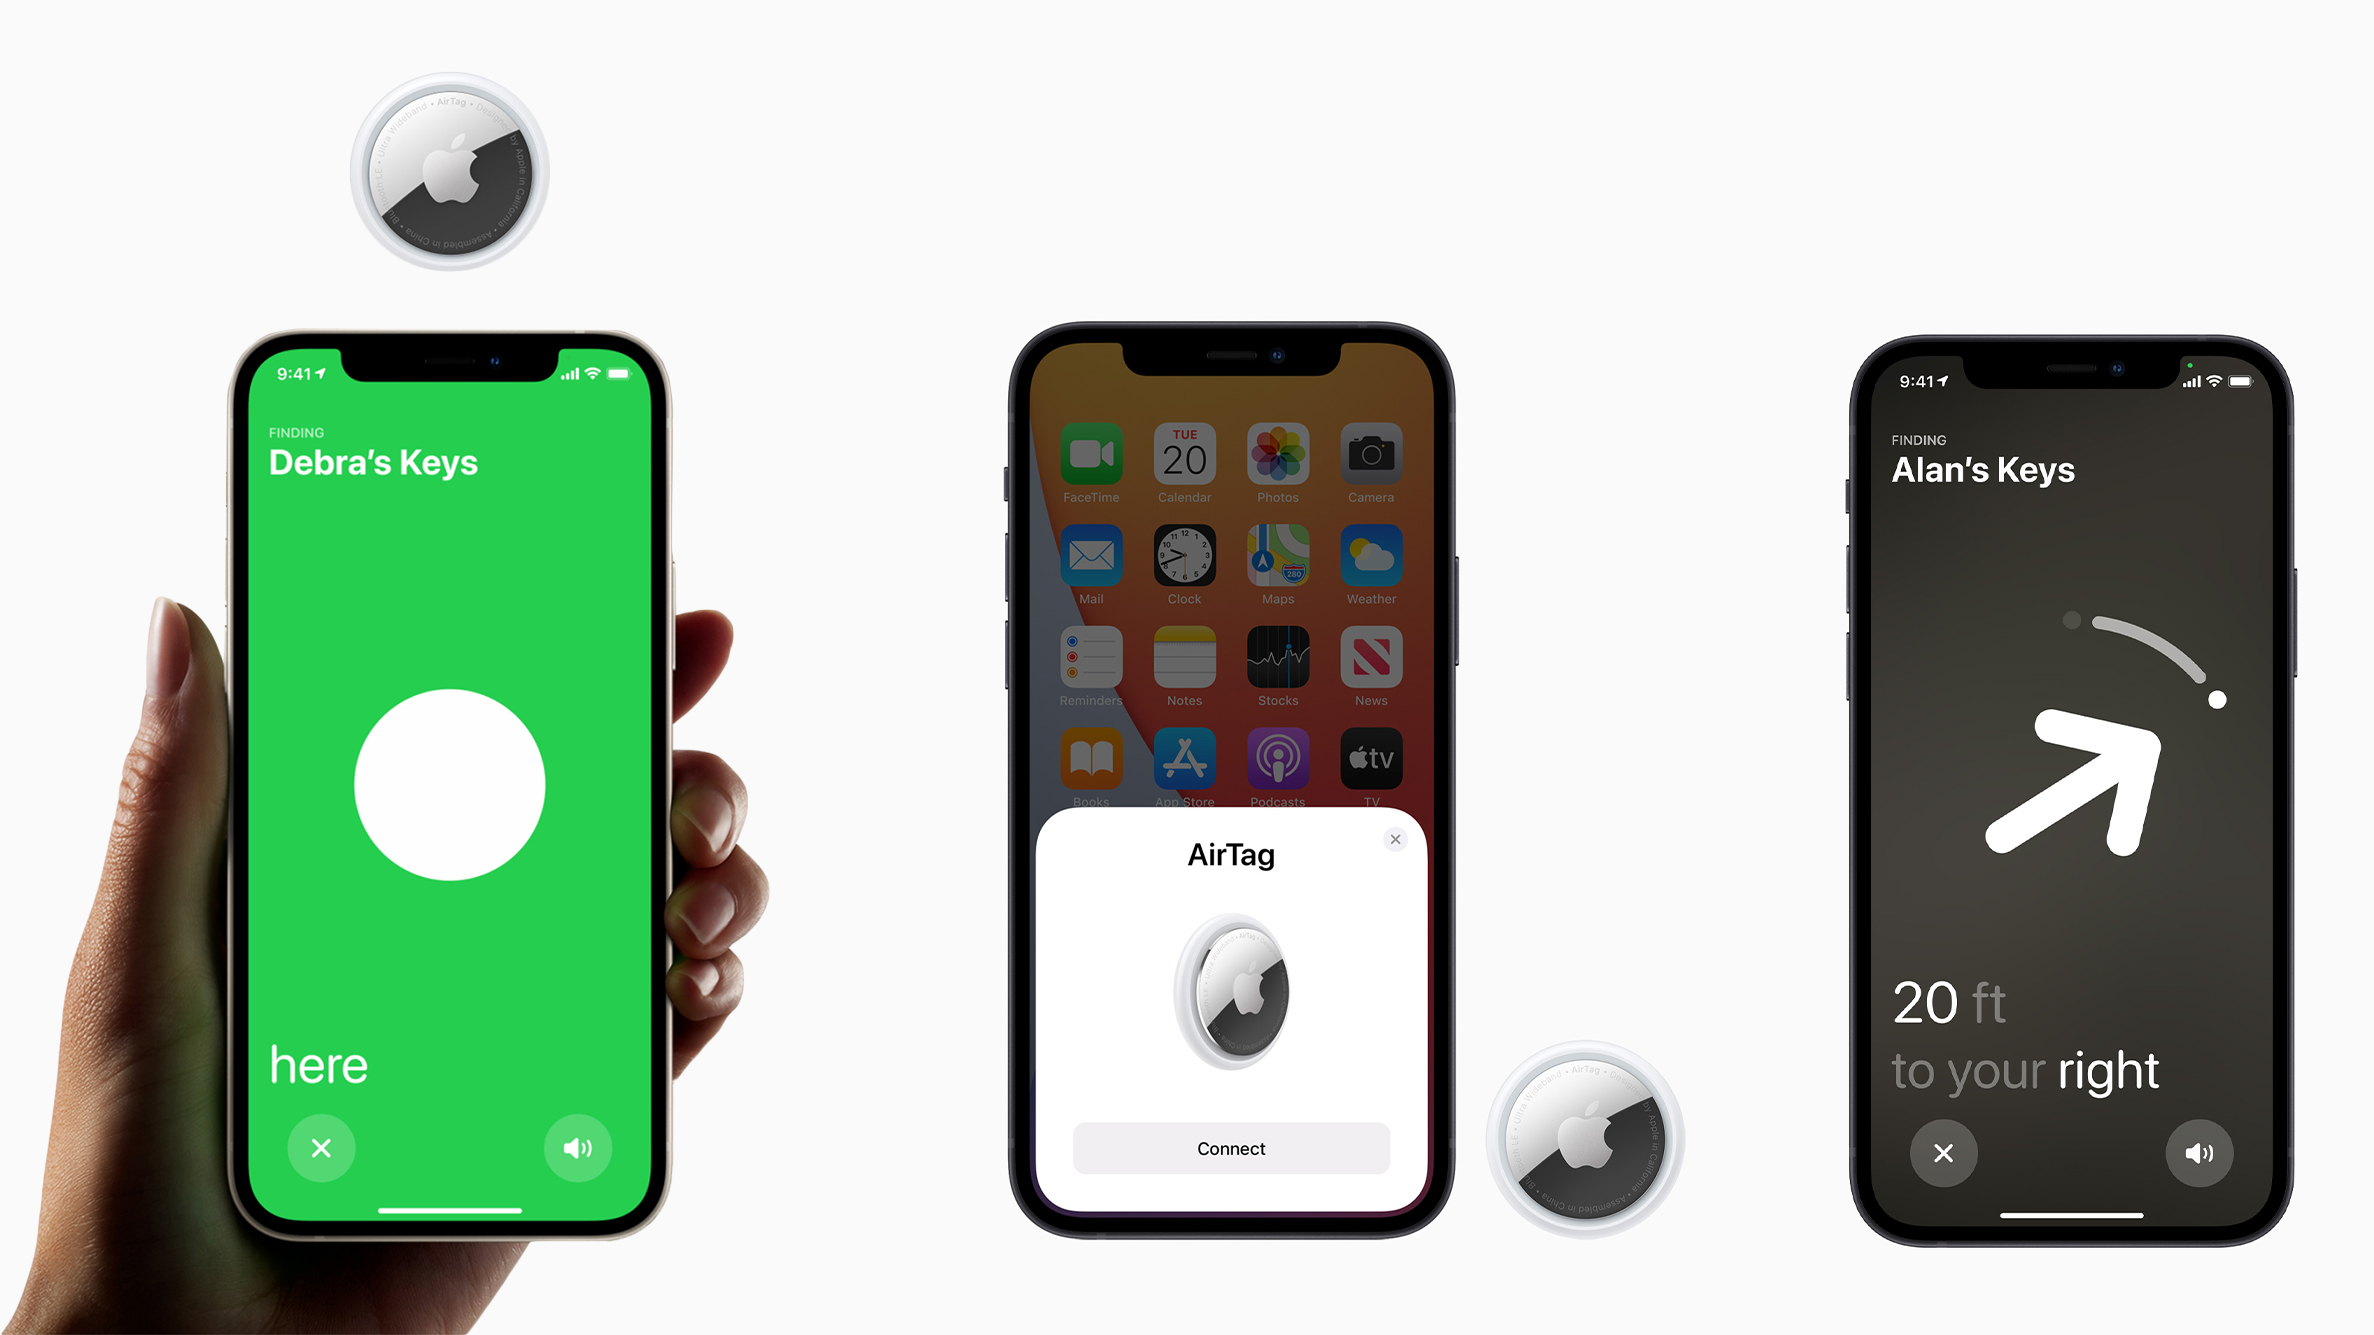 https://www.digitaltrends.com/wp-content/uploads/2021/04/apple-air-tag-new-collage.jpg?fit=720%2C720&p=1